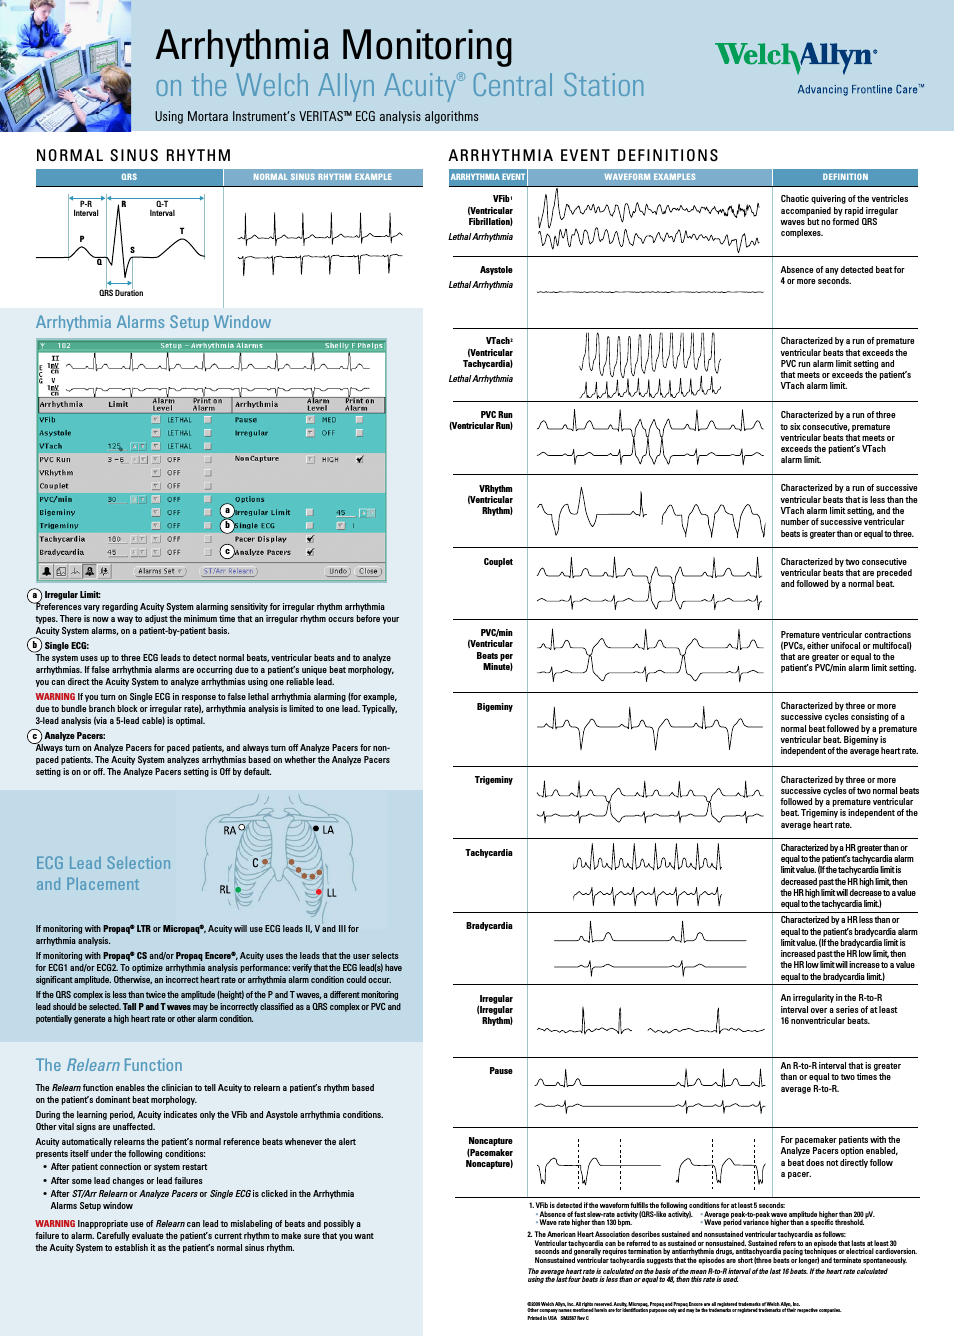 Arrhythmia Monitoring Chart - Quick Reference Guide